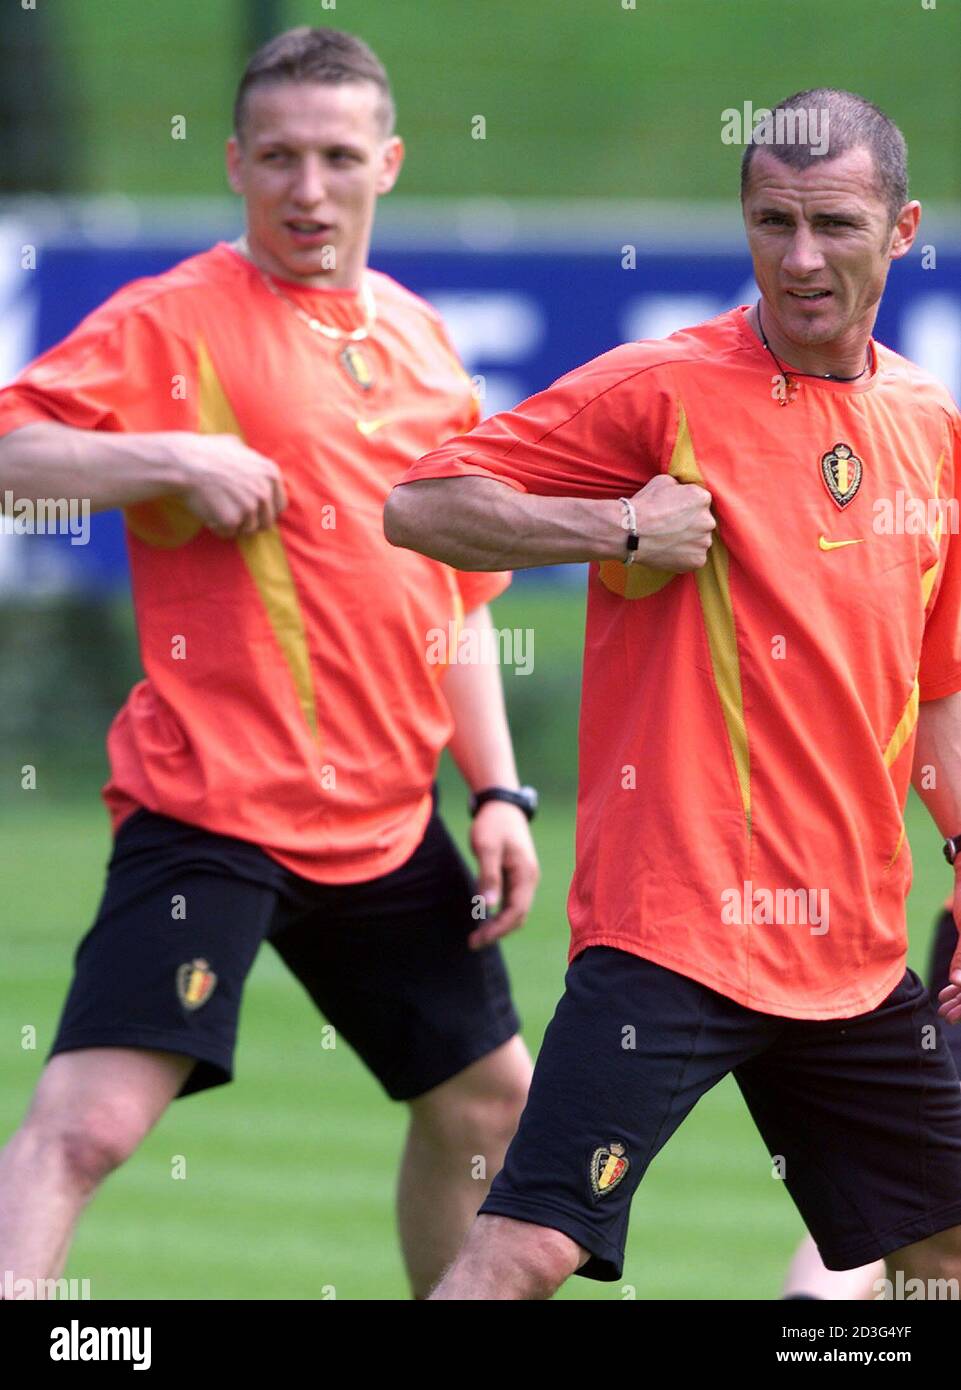 Belgian international players Danny Boffin (R) and Wesley Sonck (L) practice during a training session in Kraainem near Brussels May 20, 2002. Belgium will leave on Wednesday to take part in the World Cup, which takes place in South Korea and Japan in June this year. REUTERS/Francois Lenoir  FLR Stock Photo